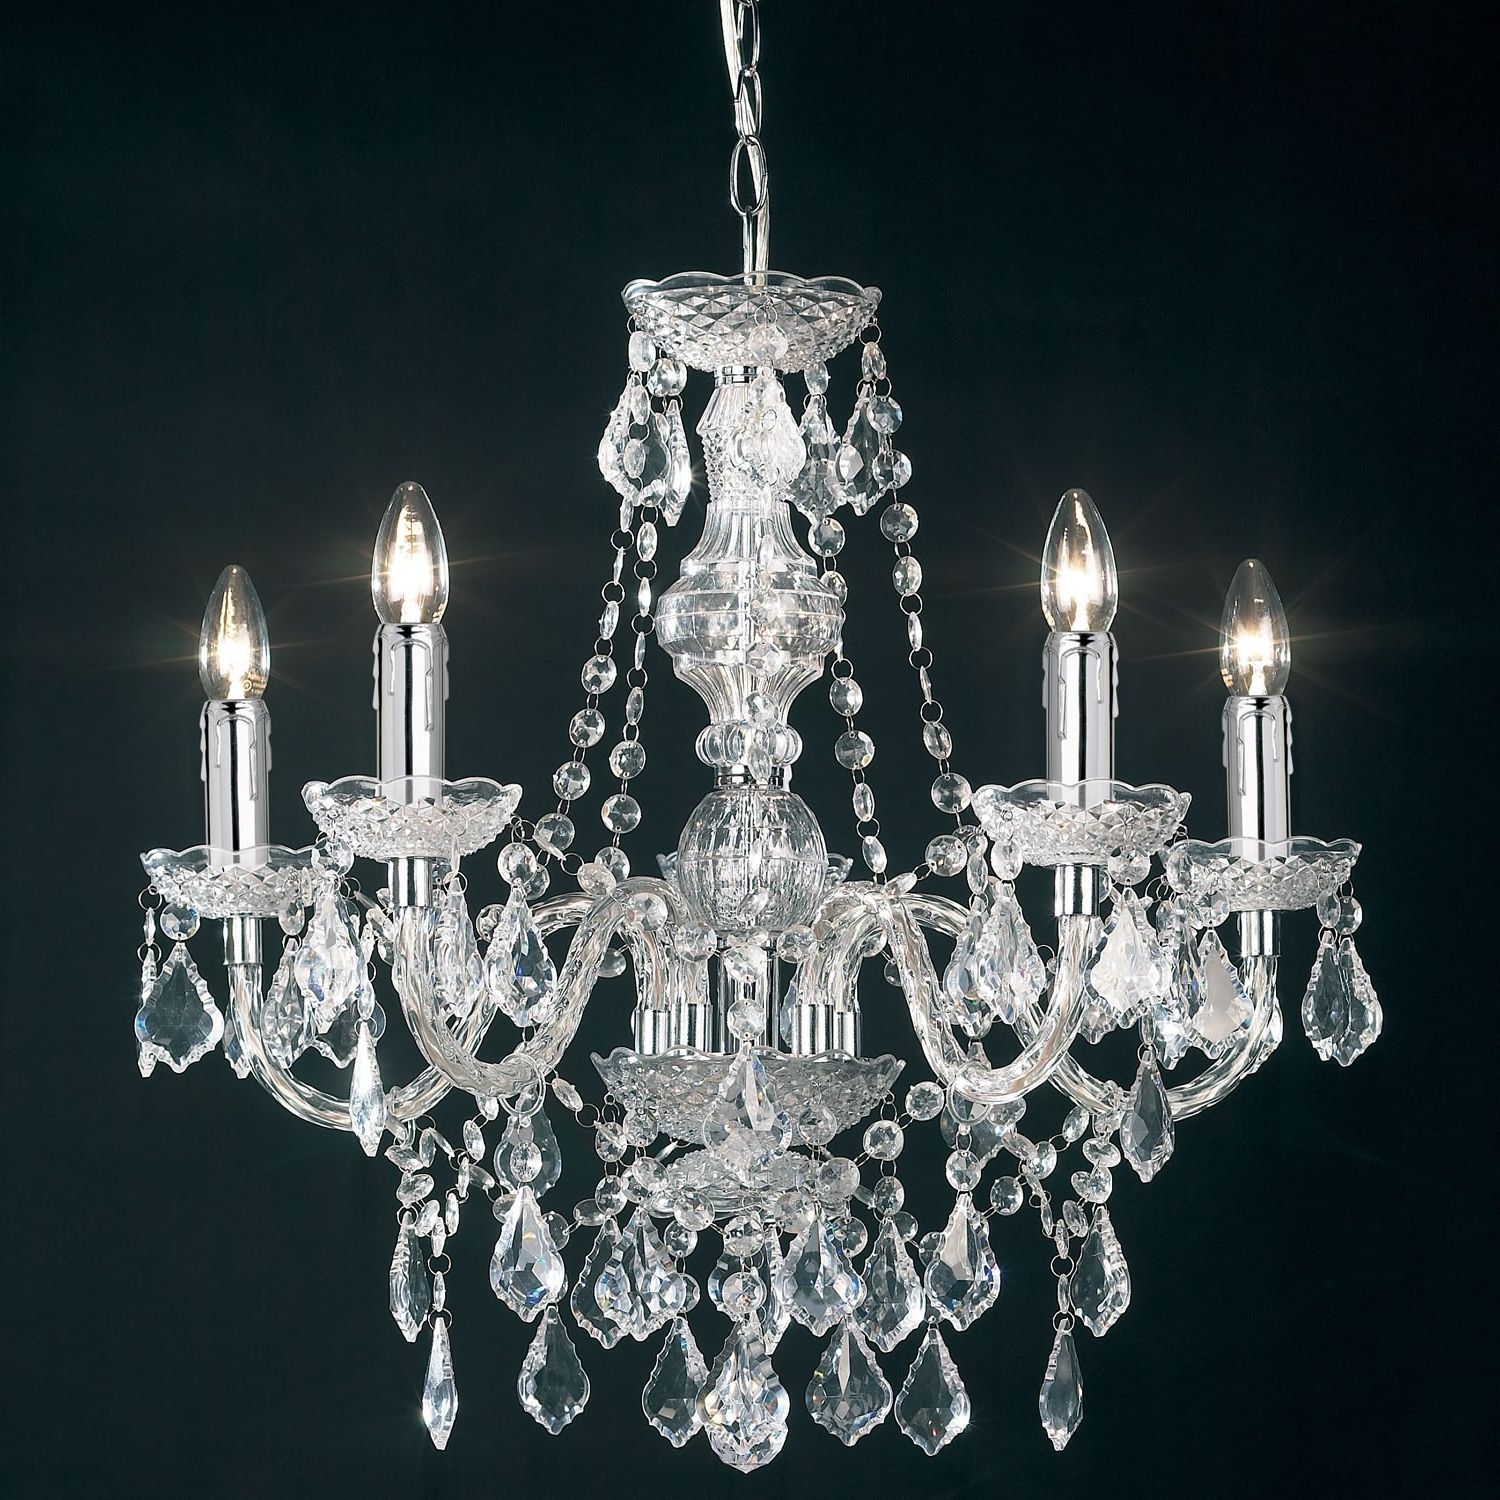 Well Known Acrylic Chandelier Lighting Within Luxury Acrylic Chandelier – Home Designing (View 15 of 15)